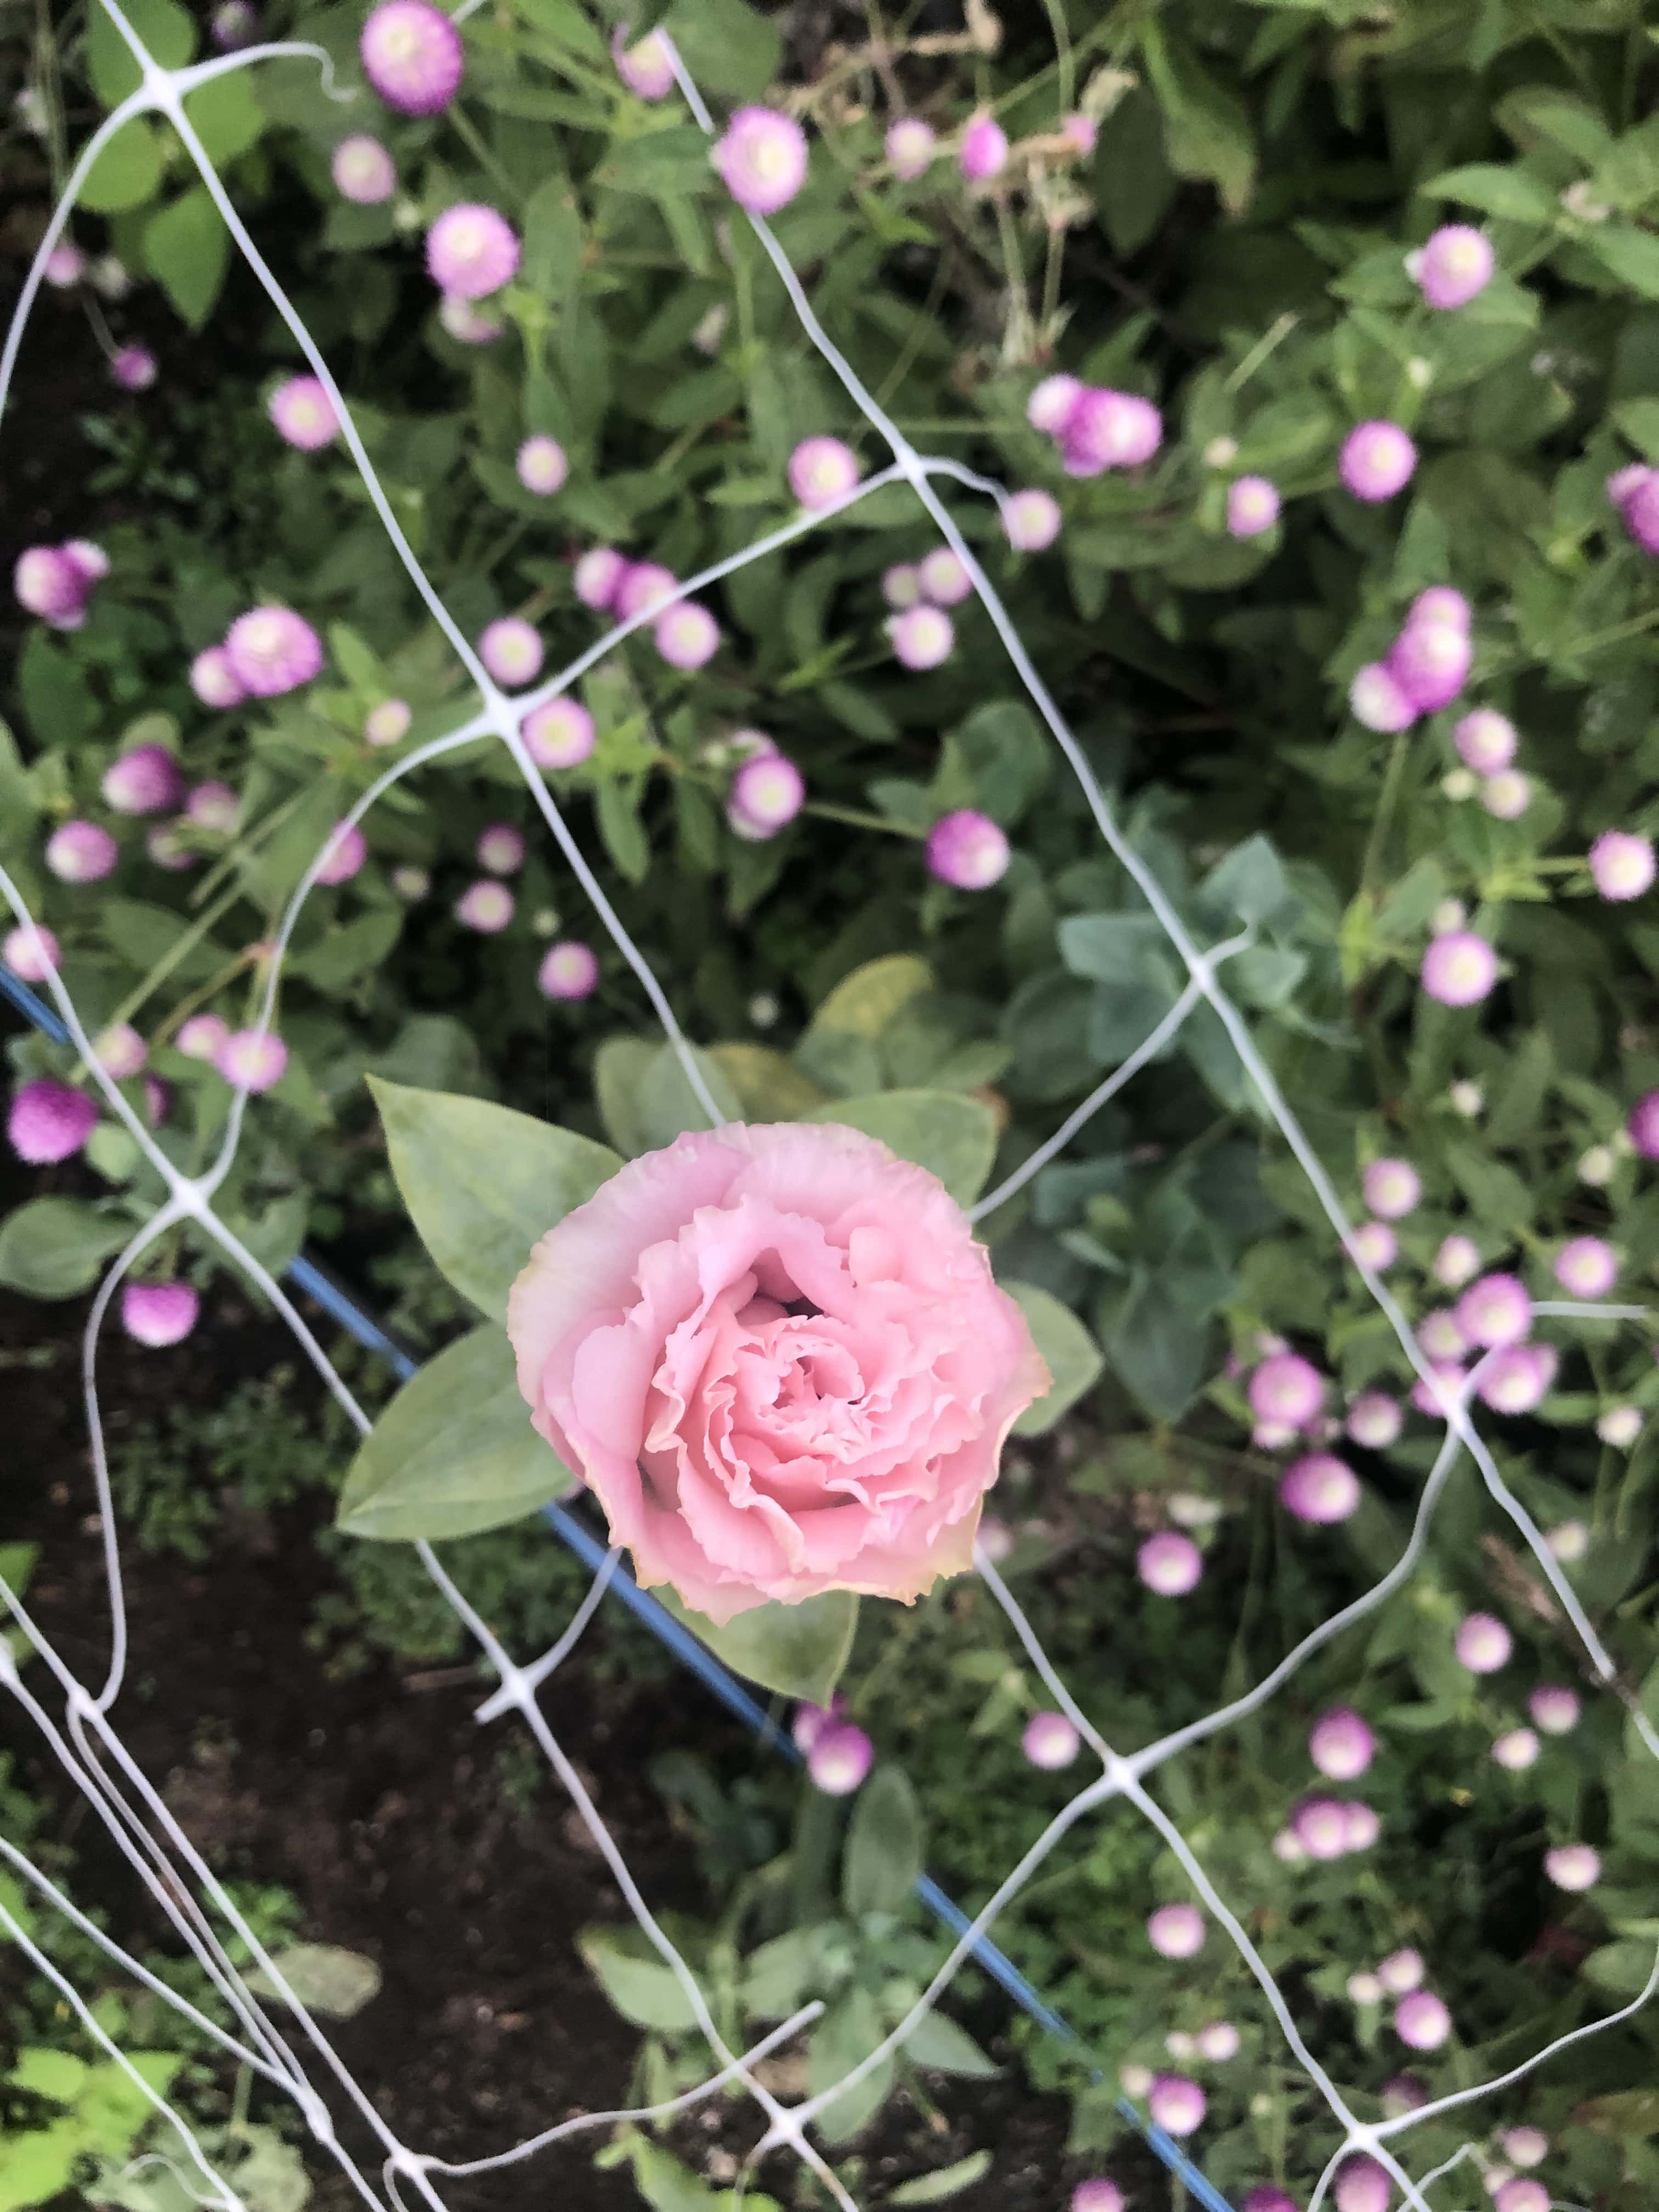 pink lisianthus flower growing up through a white netting trellis. Underneath the trellis lots of pink gomphrena flowers and leaves are growing.